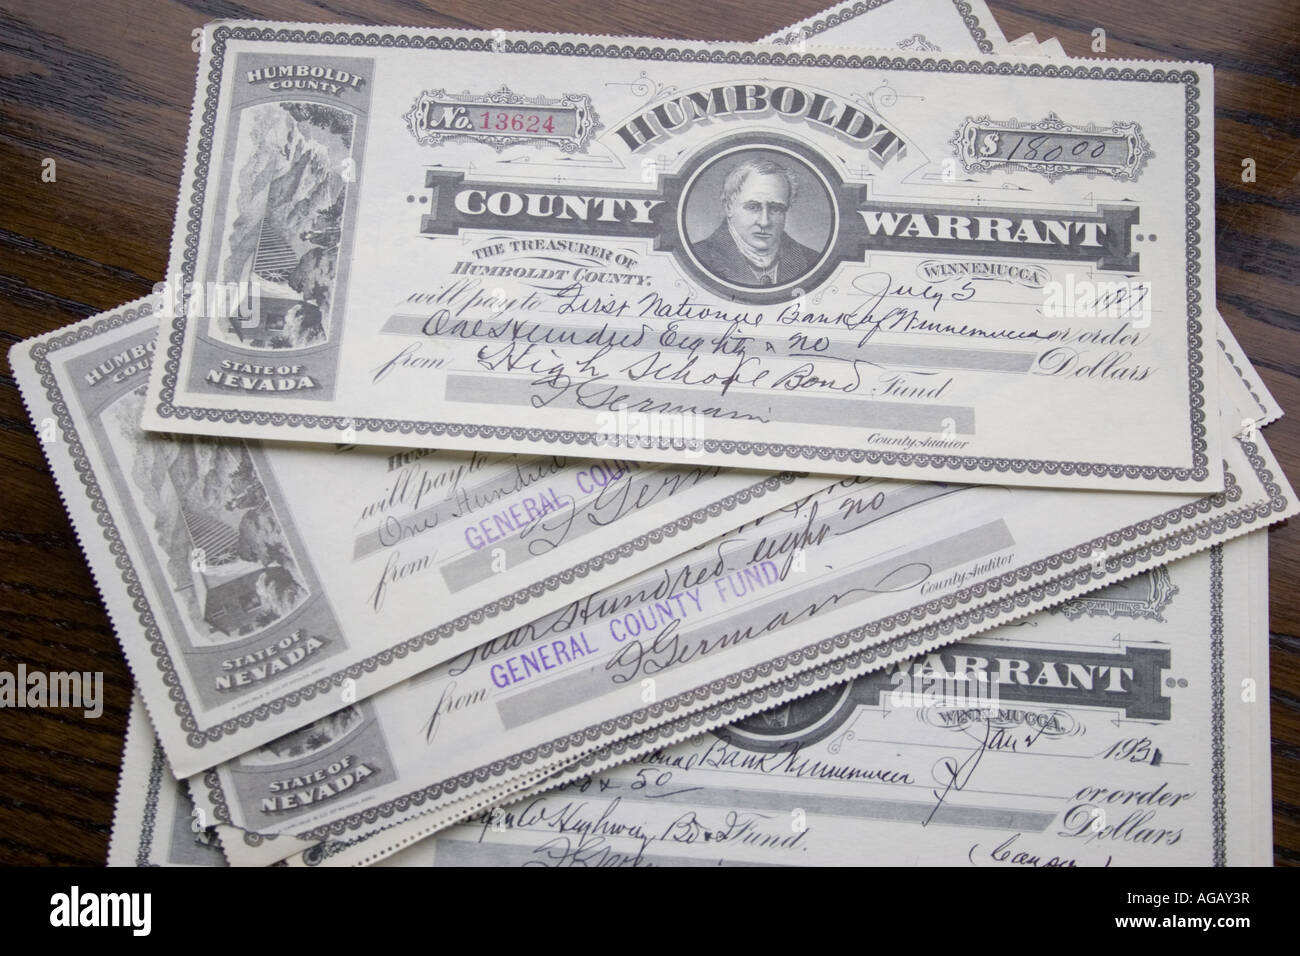 Humboldt County warrants, old warrant issued by the County to pay for it's services. Stock Photo